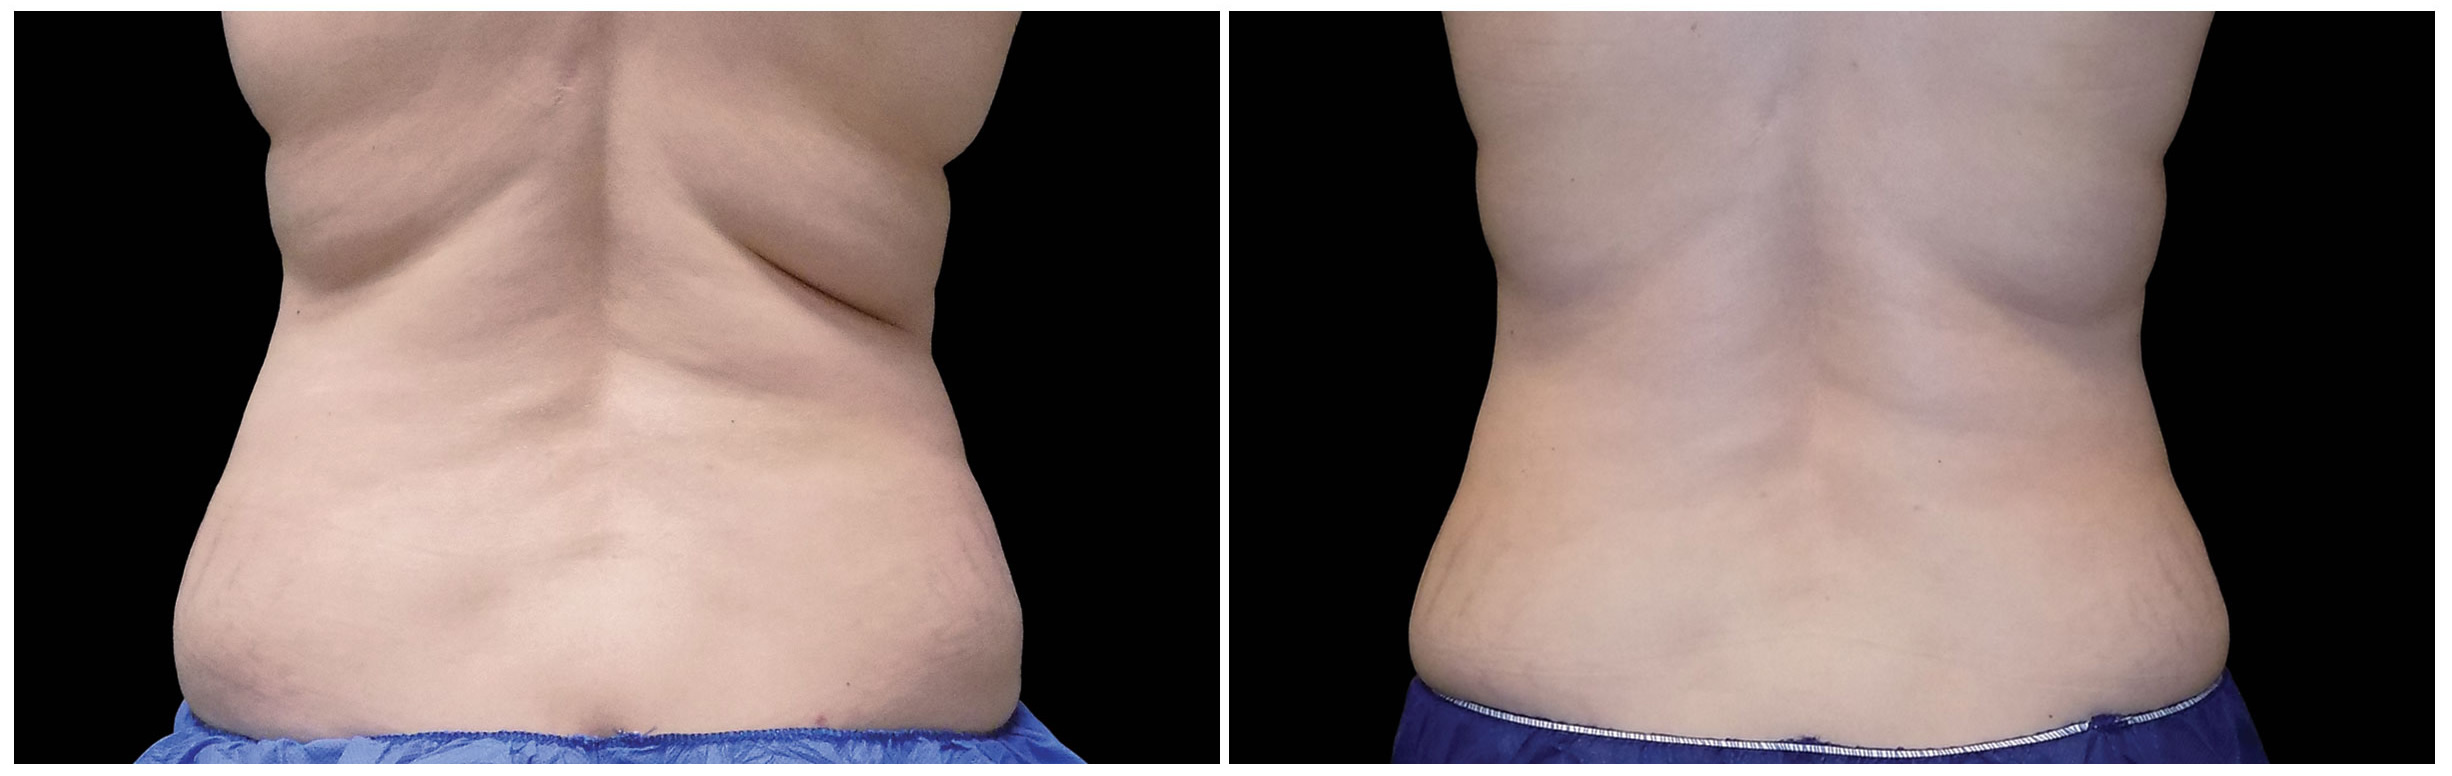 CoolSculpting for Back Fat - Dr. Michele Green M.D.